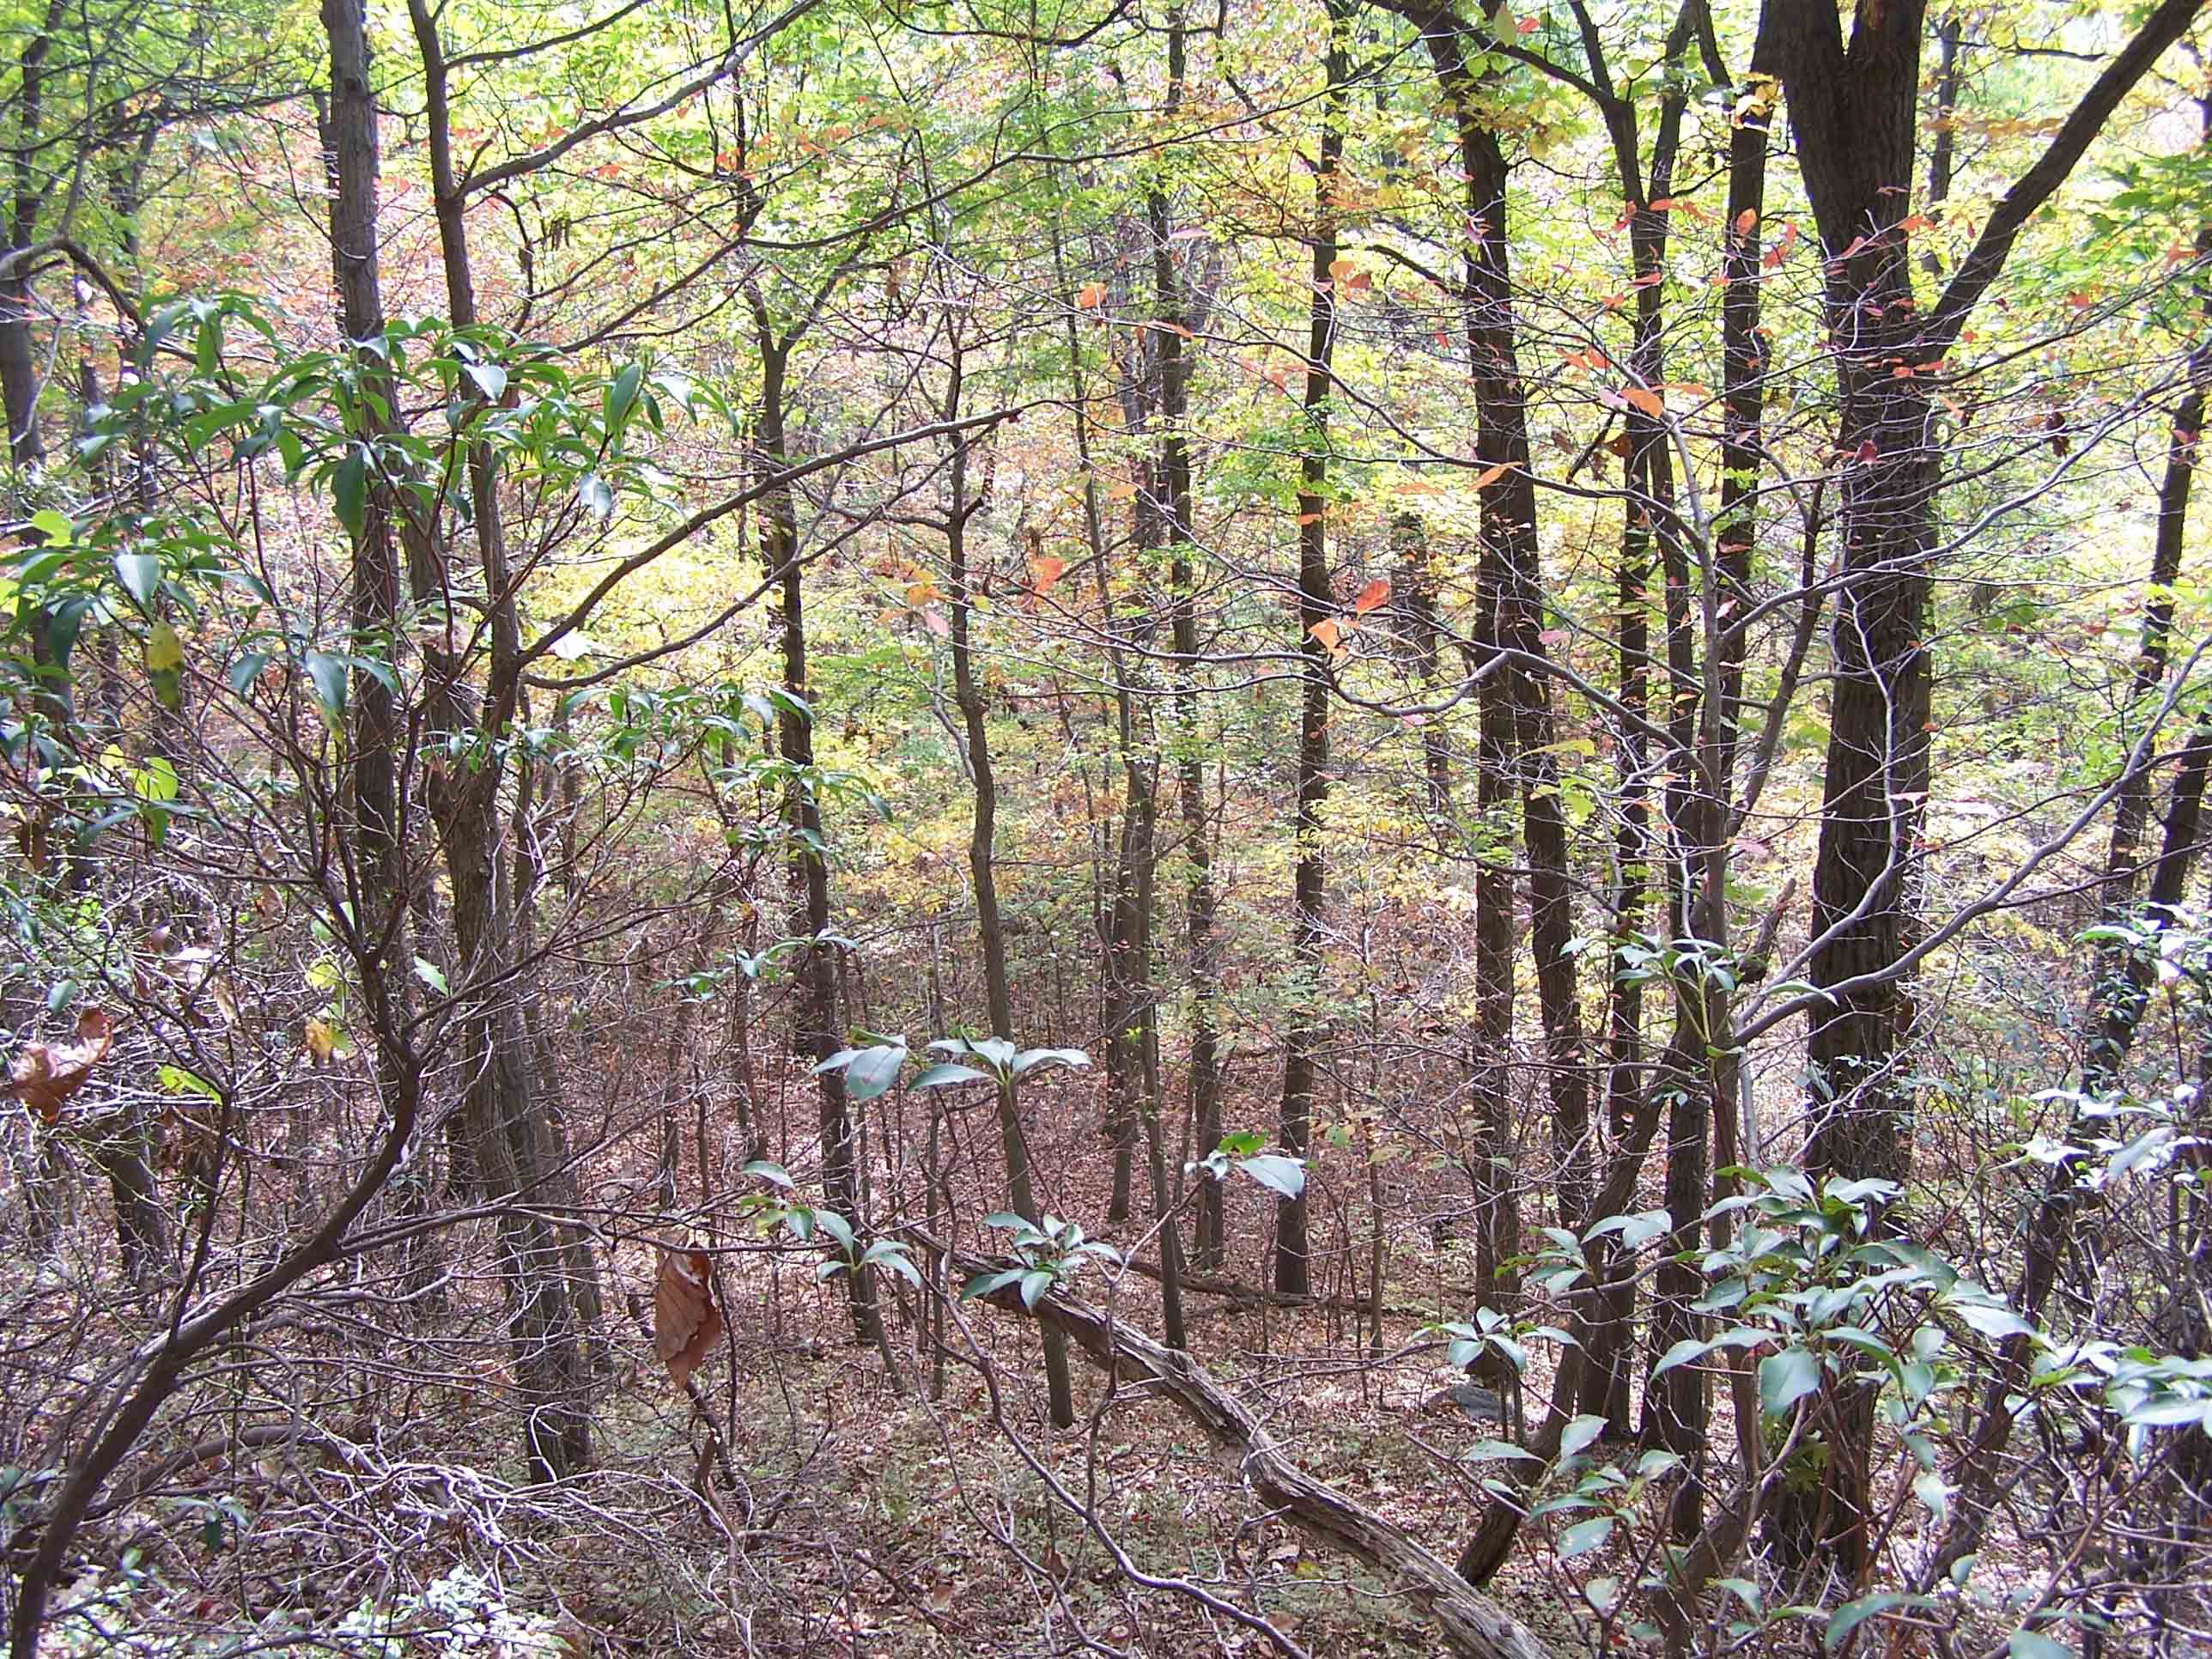 View down from trail into woods. Courtesy at@rohland.org